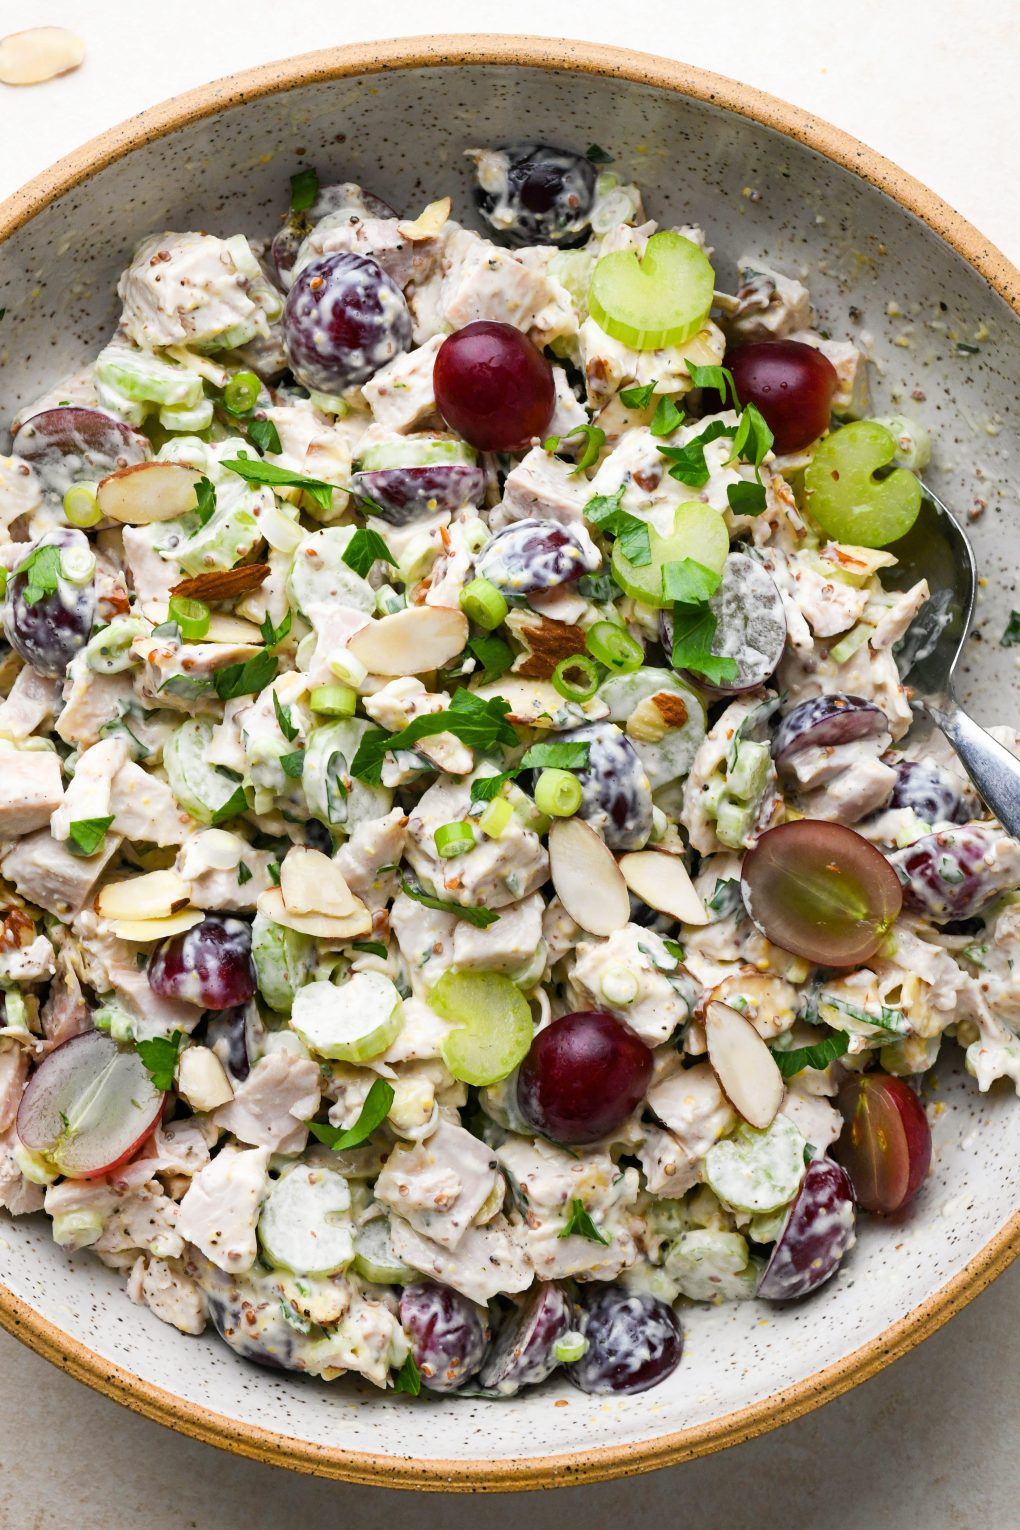 Chicken salad with grapes in a large ceramic speckled bowl